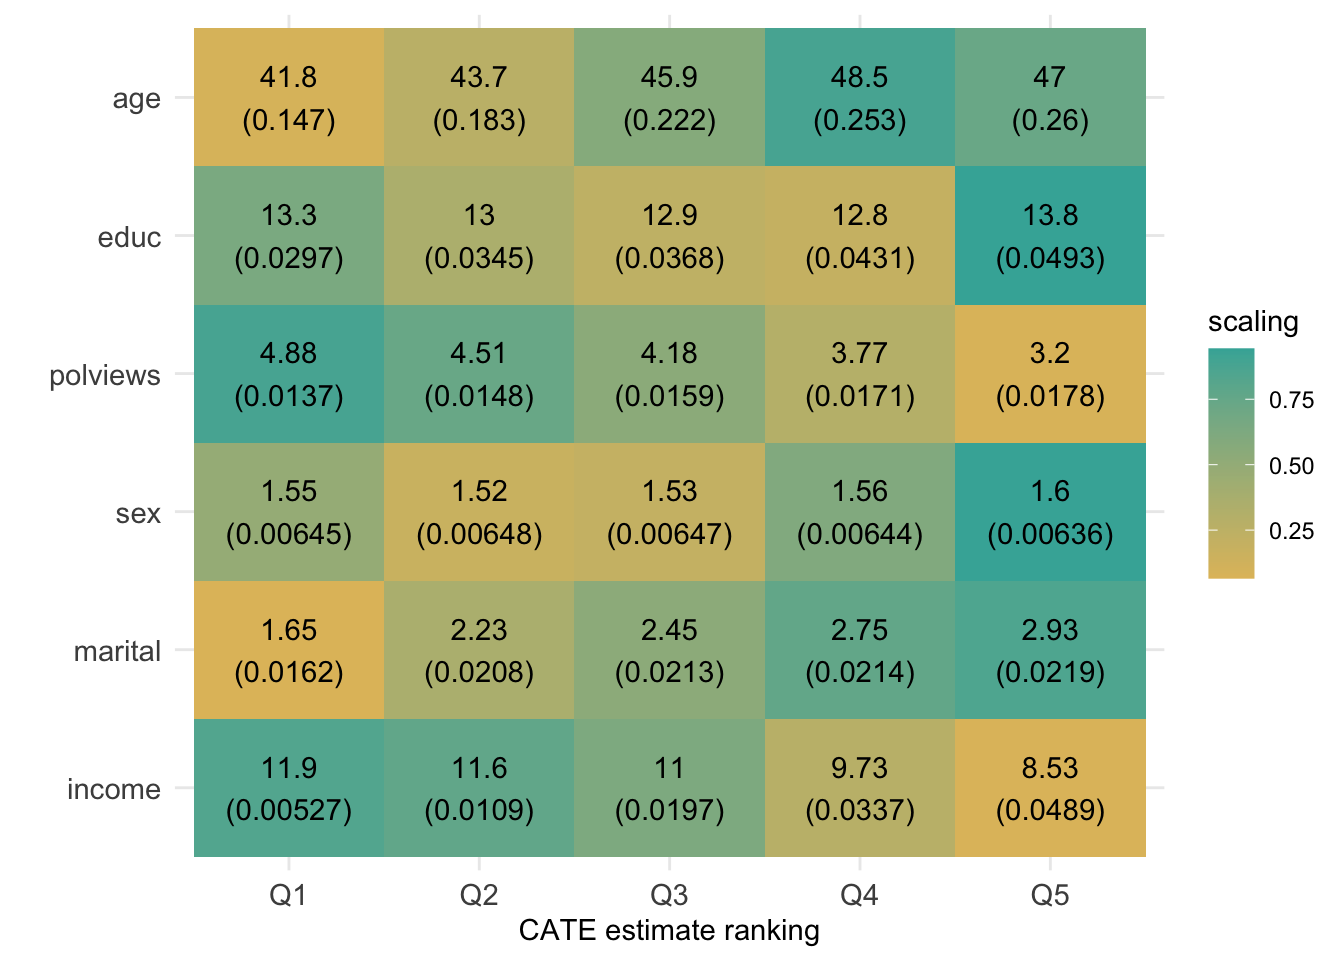 Average covariate values within group (based on CATE estimate ranking)